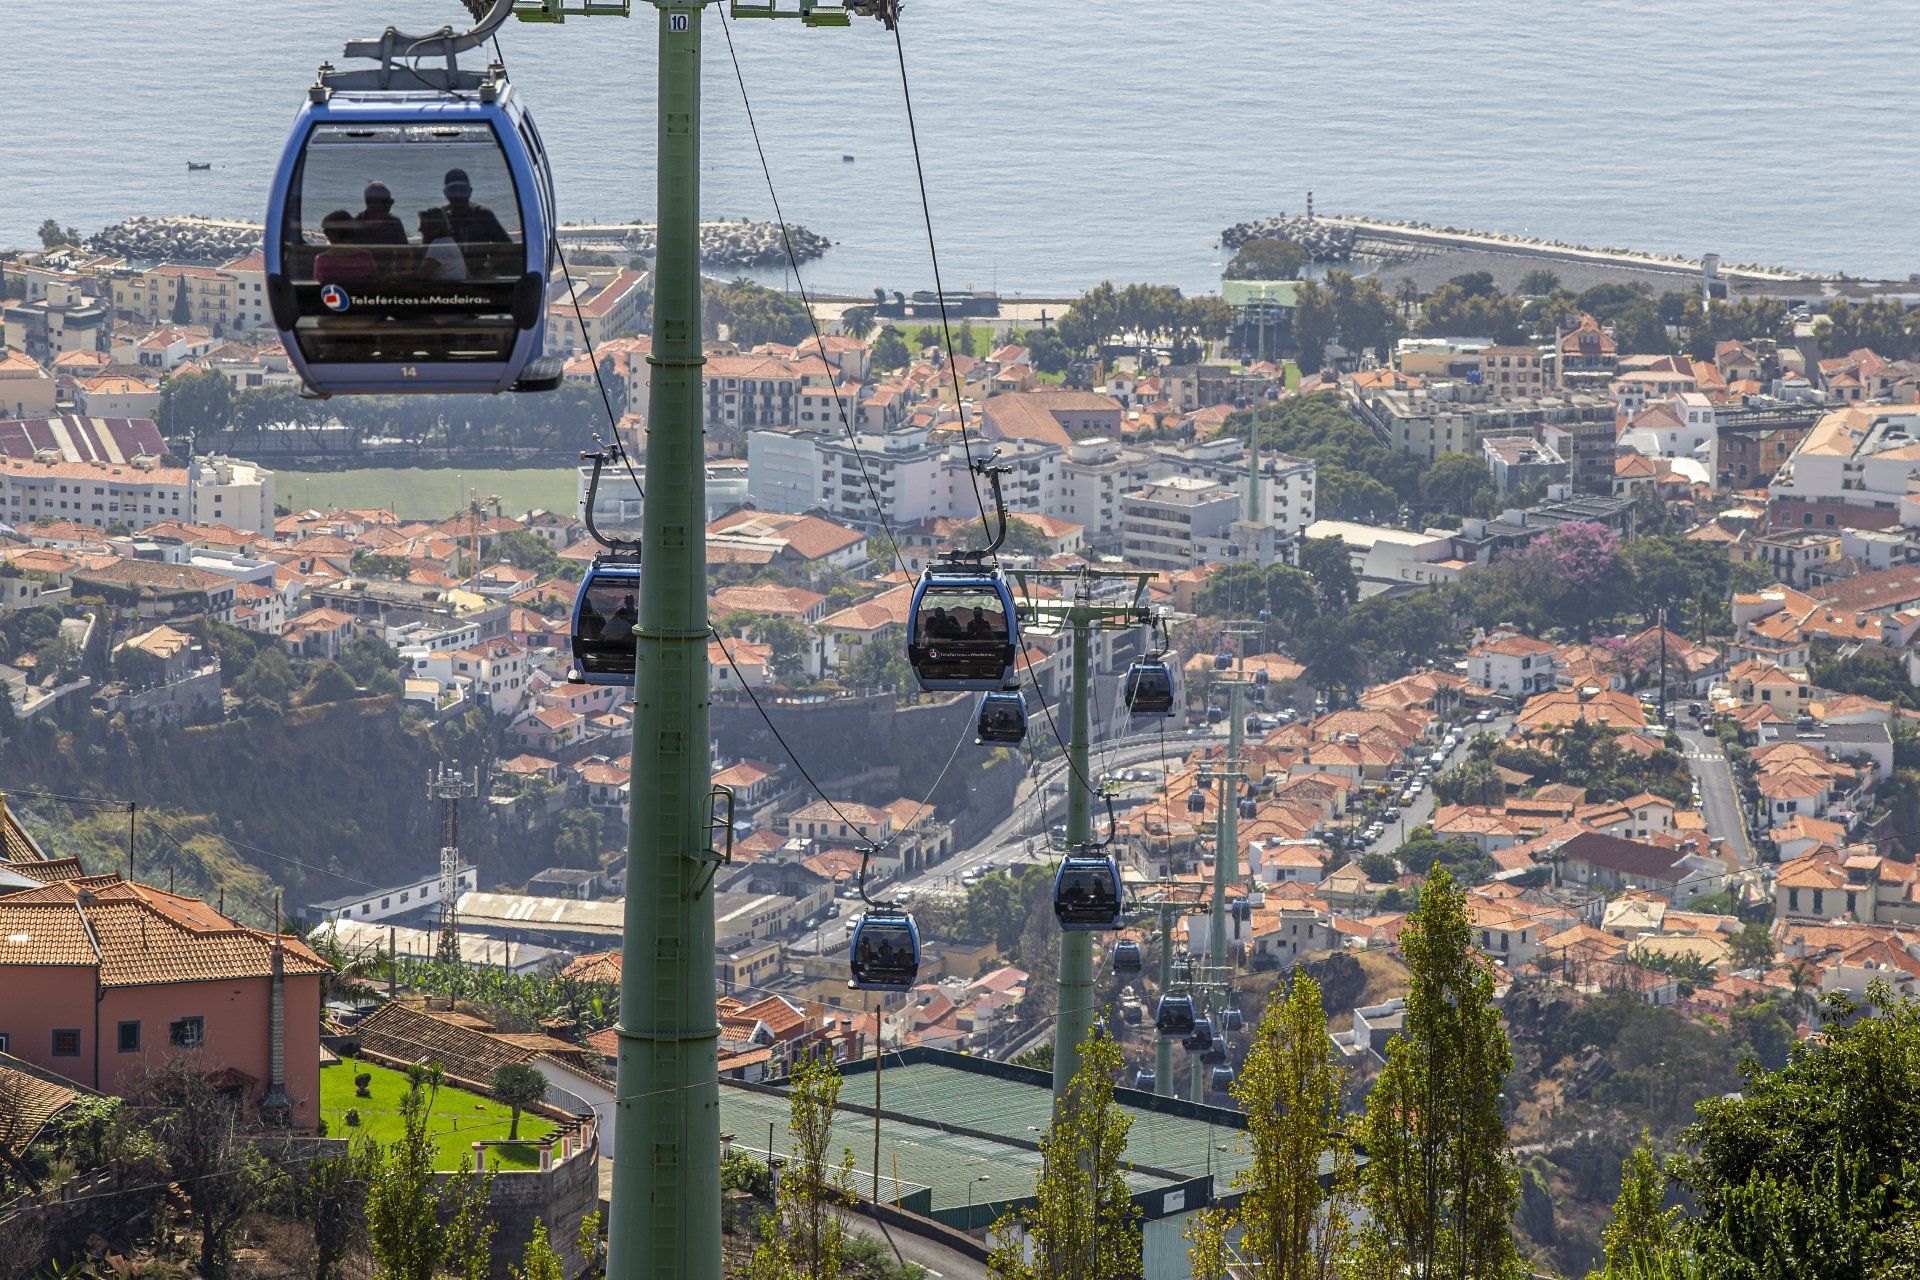 The Funchal Cable Car, Madeira Cable Car, Gondola Lift, Portugal - Madeira Holidays Barter's Travelnet